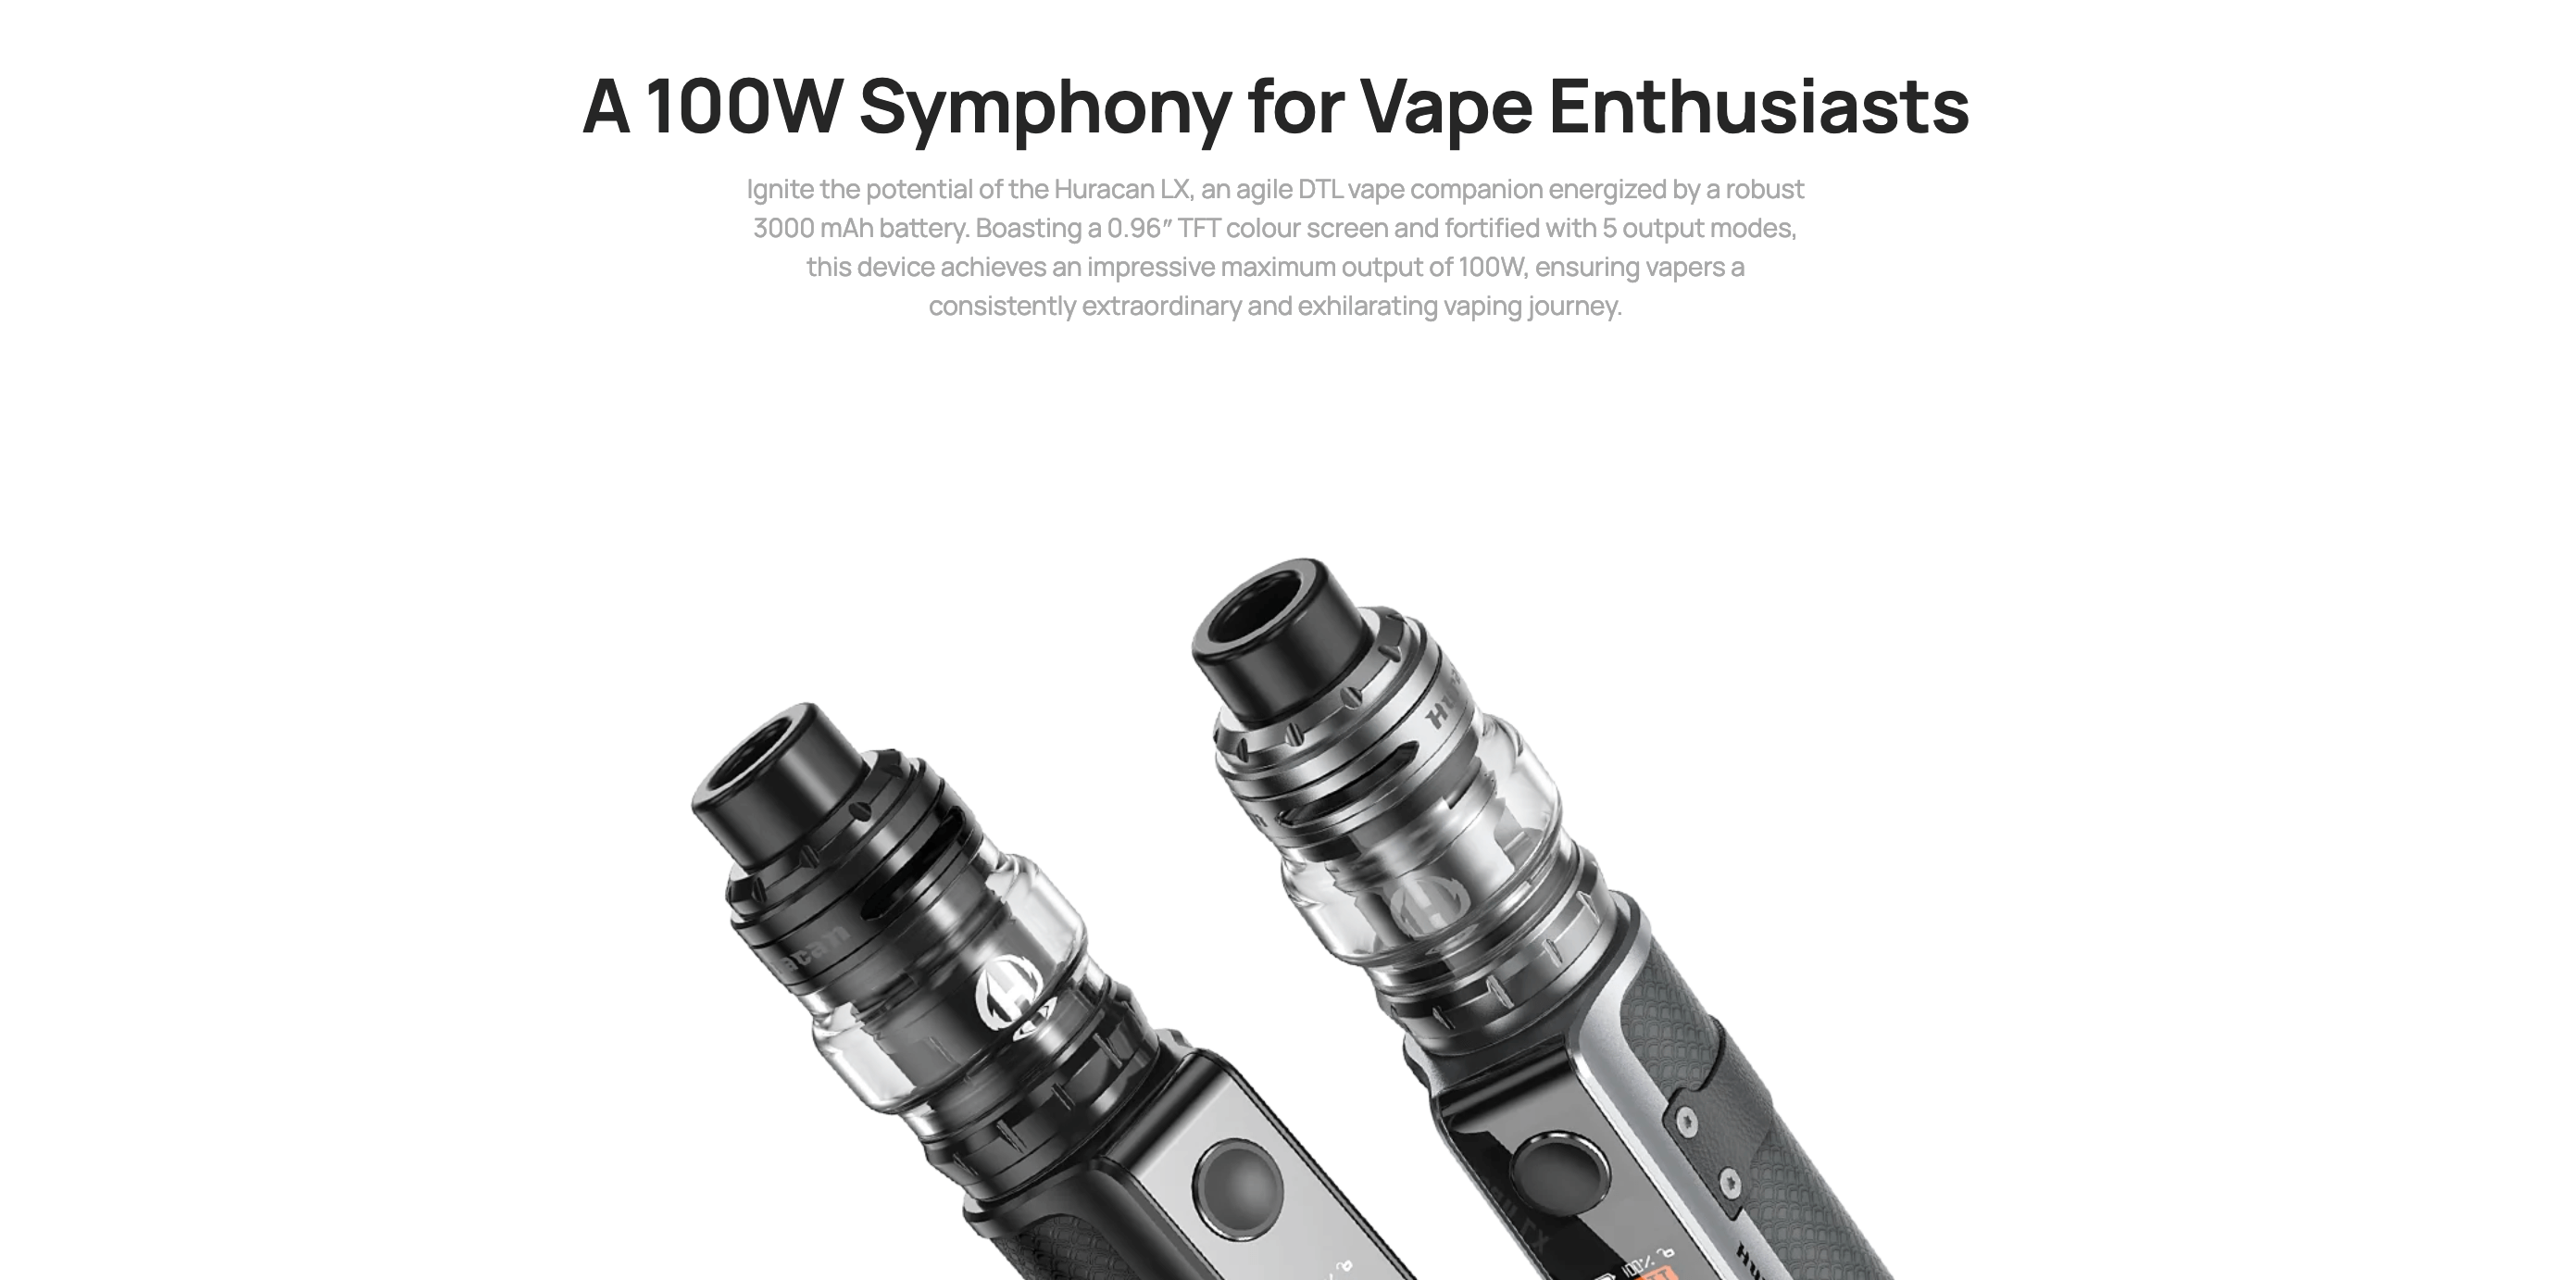 Aspire Huracan LX - A 100w Symphony for vape enthusiasts